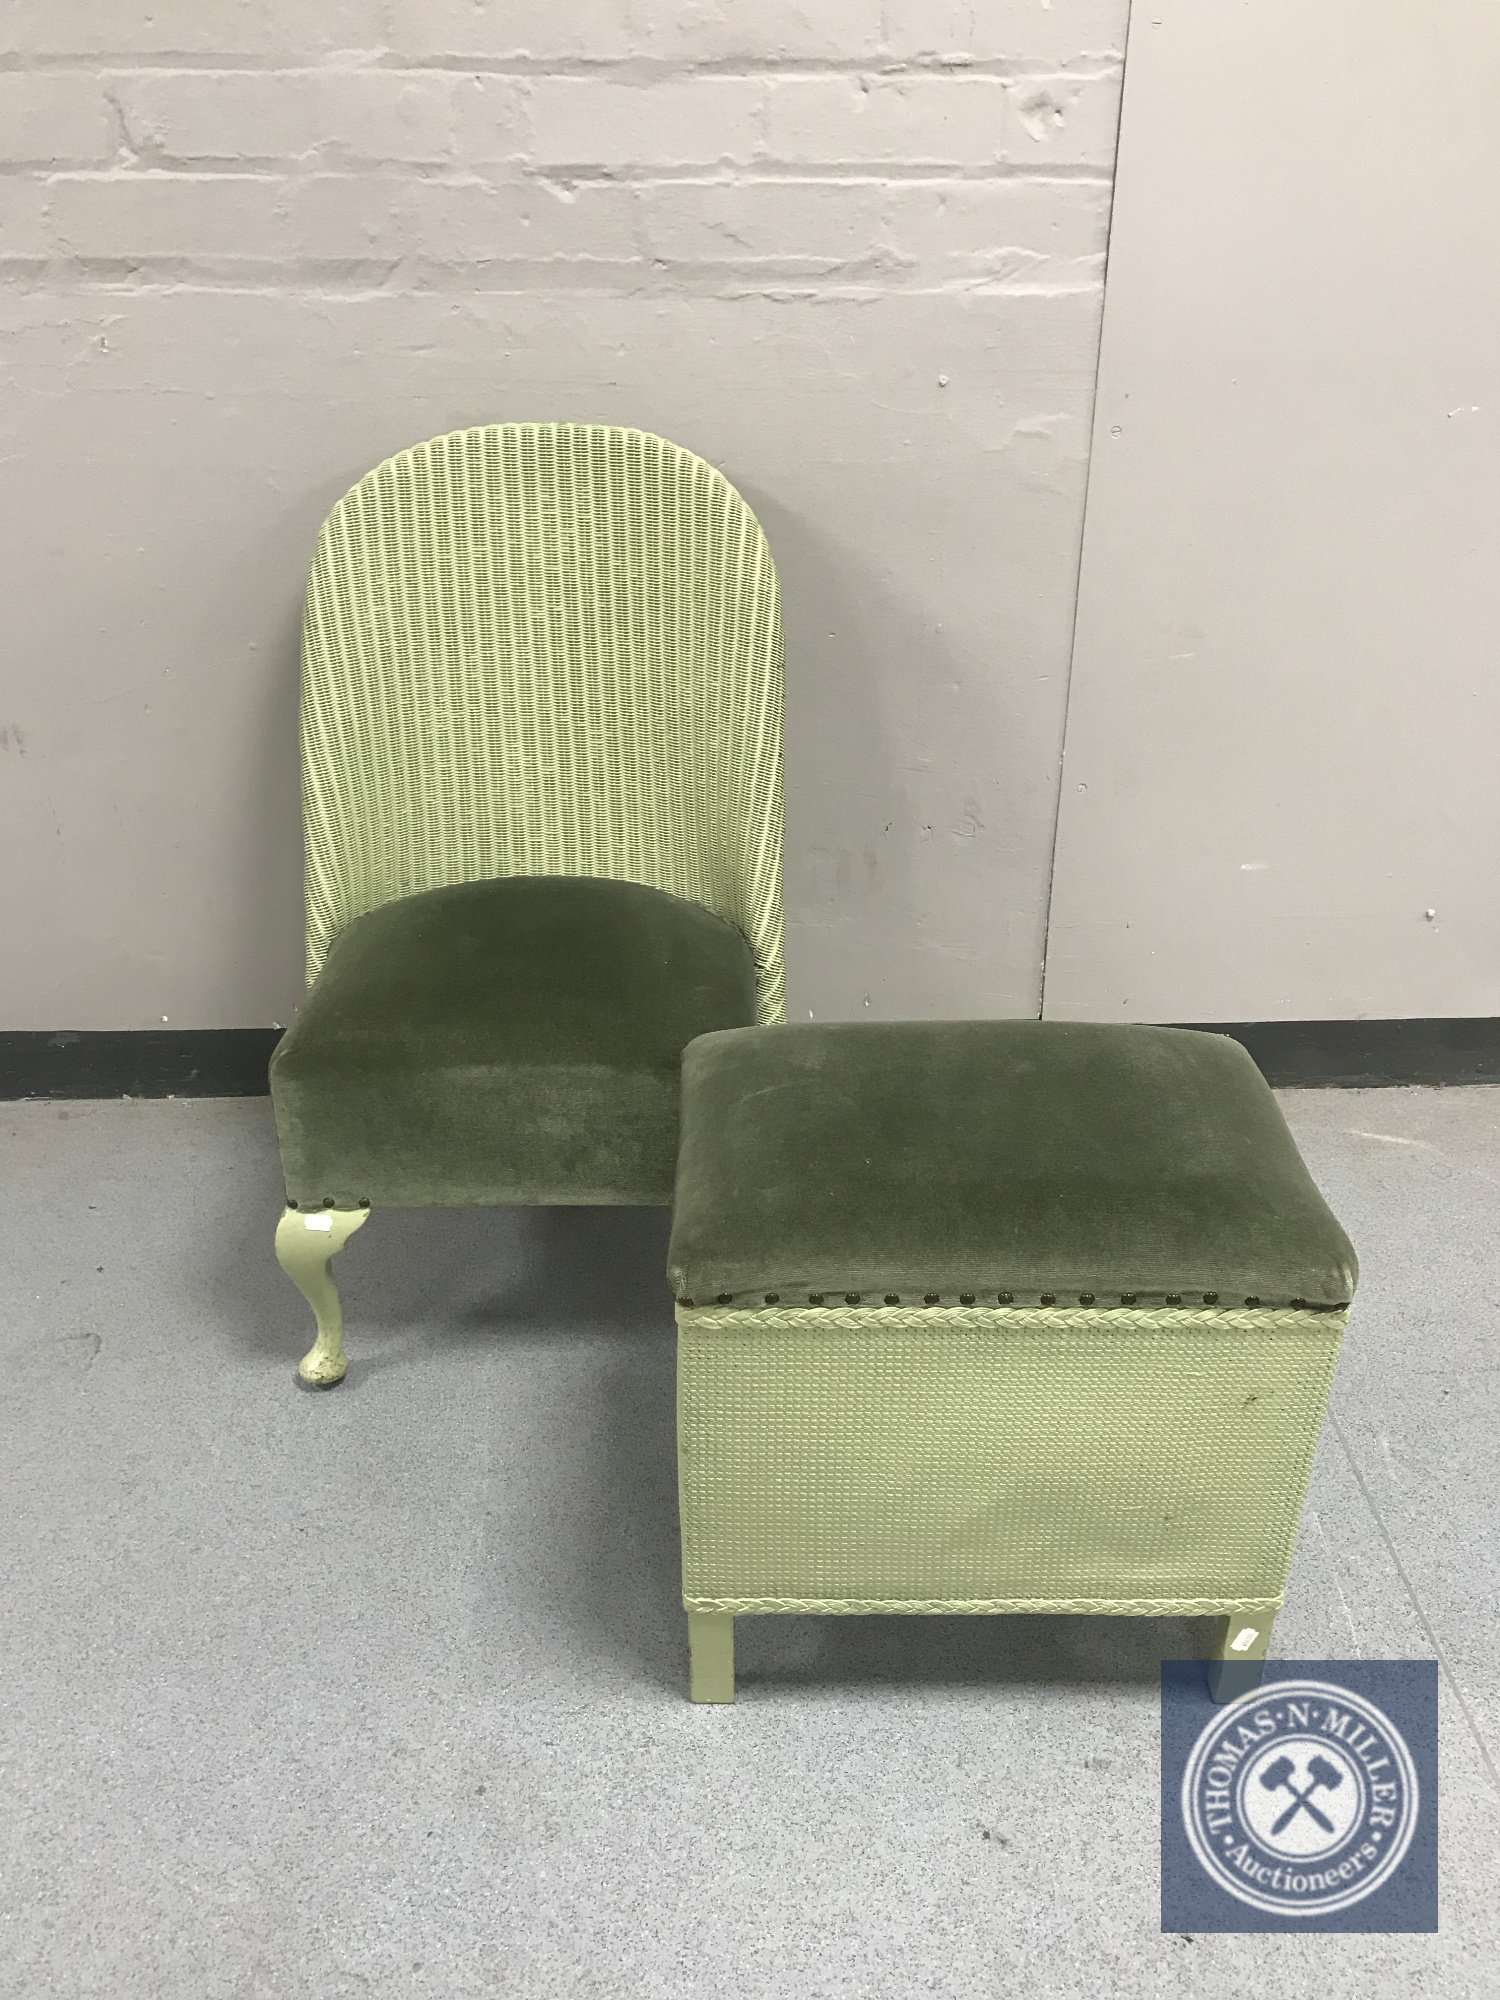 A green loom bedroom chair together with a storage footstool